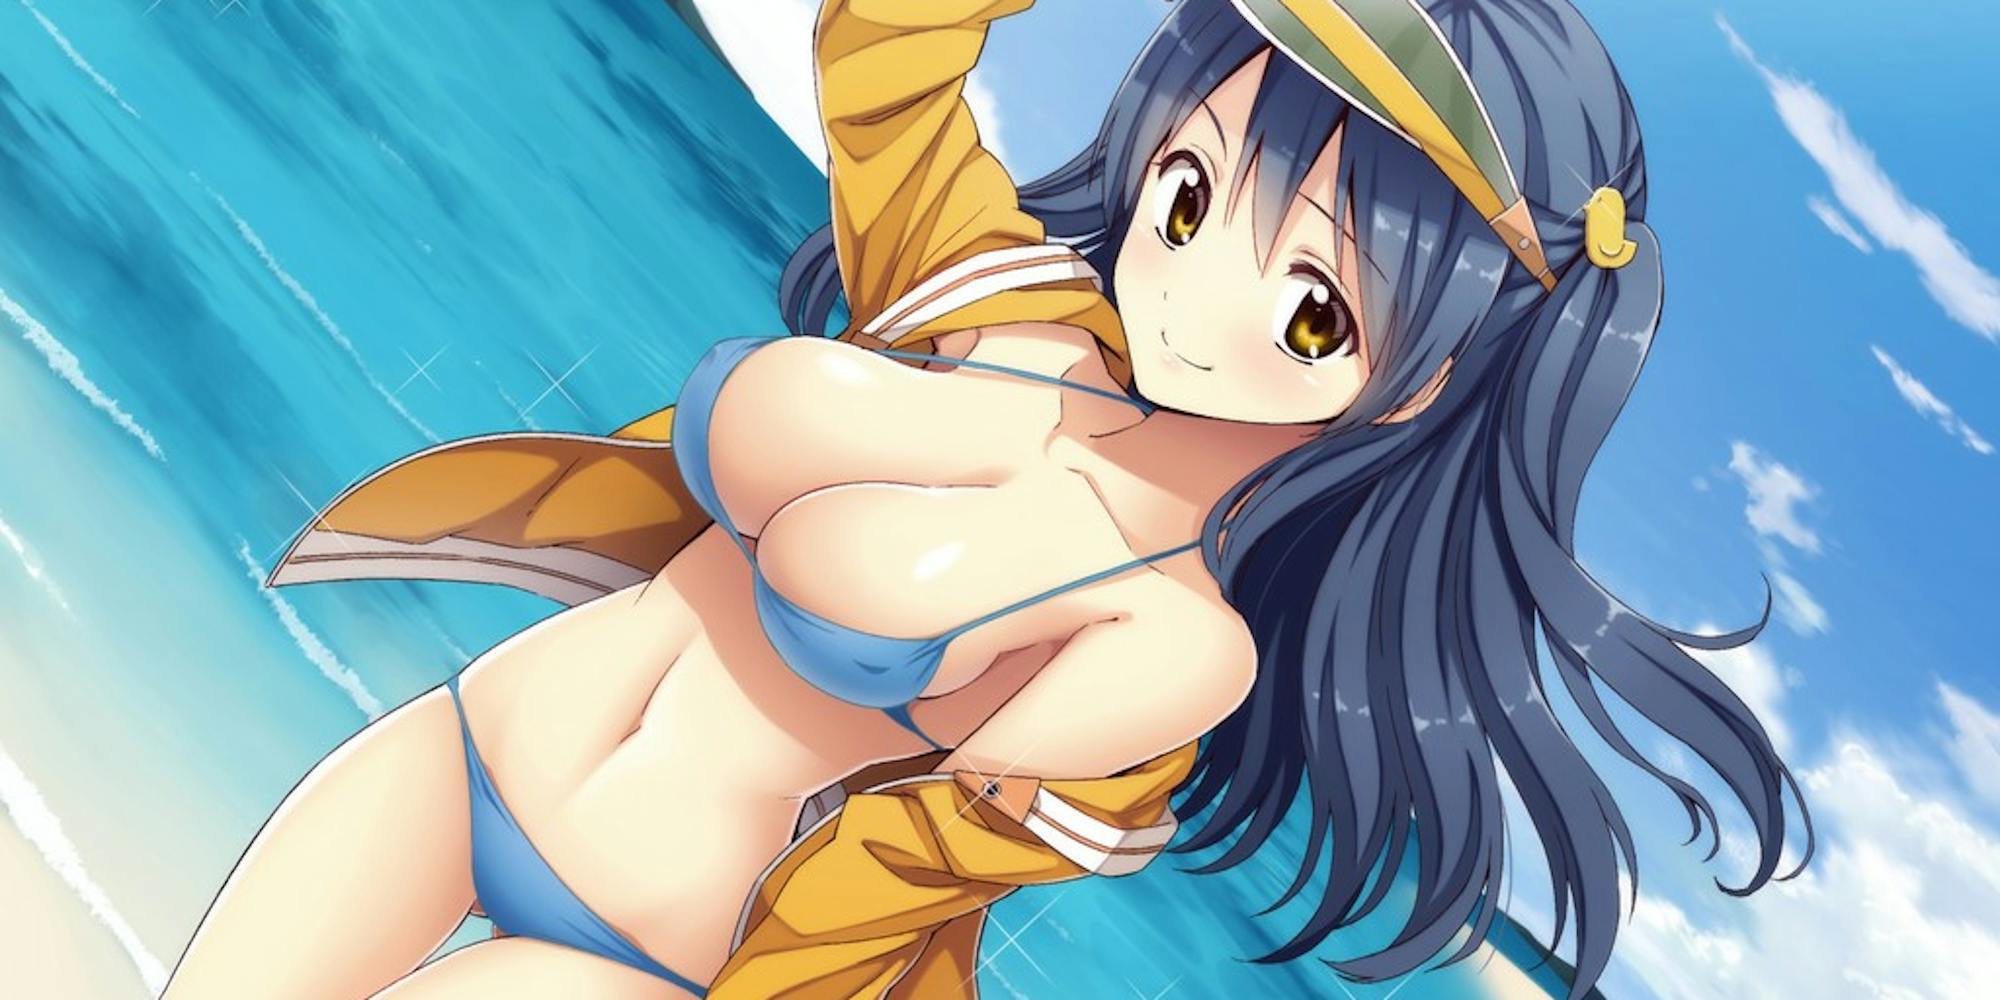 Steam bans adult visual novel months after release, raising censorship fears (updated)